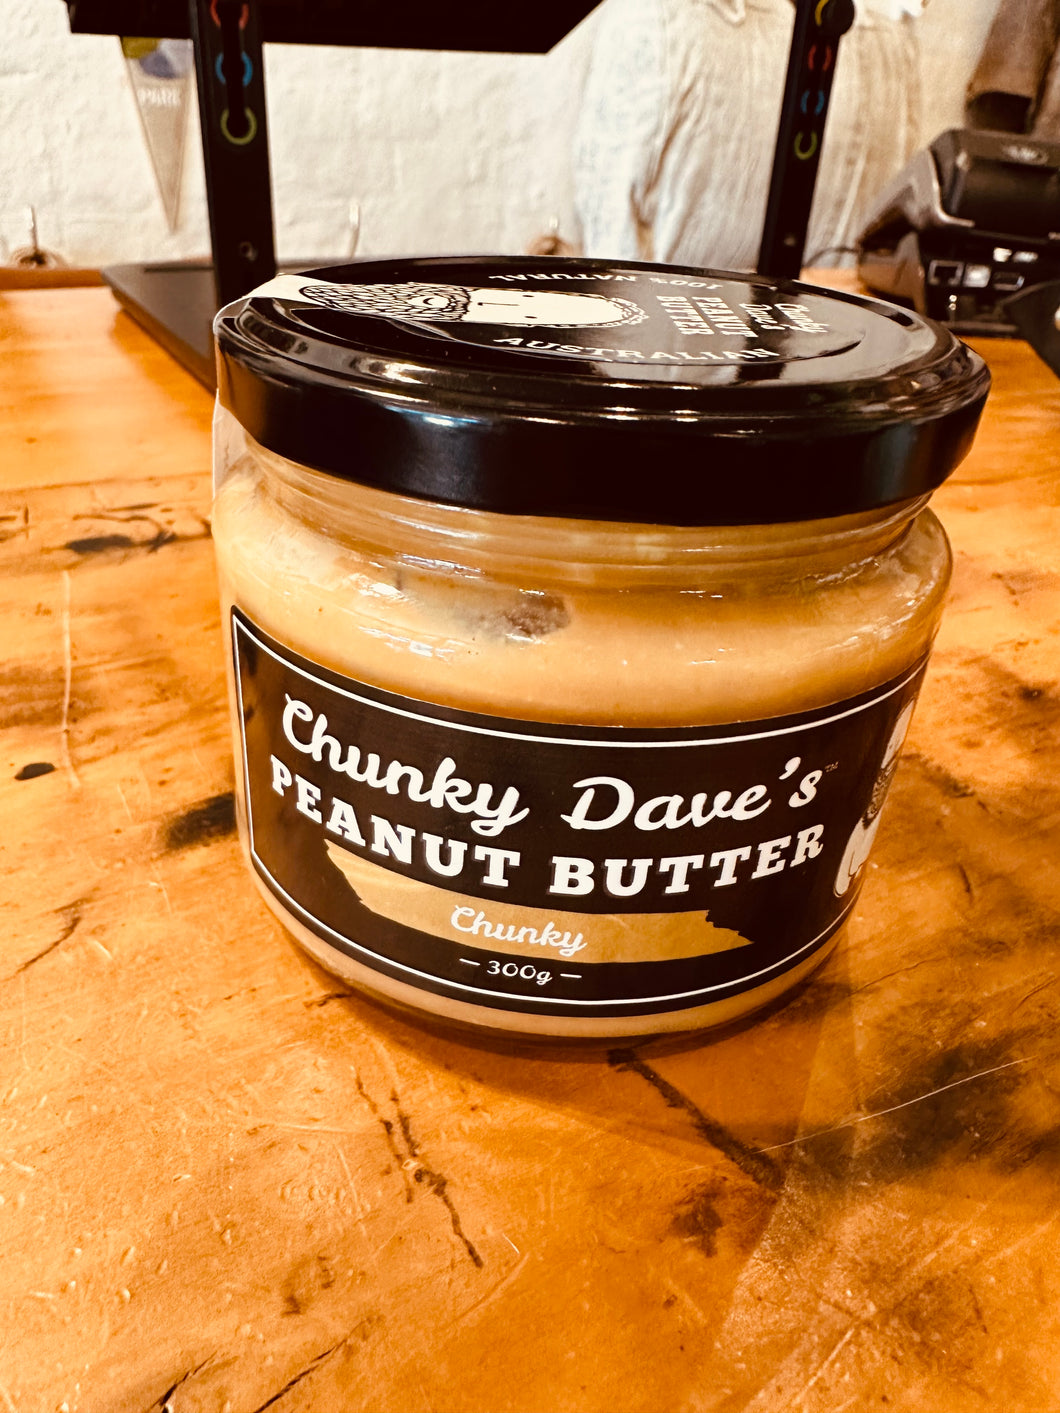 Chunky Dave’s Peanut Butter